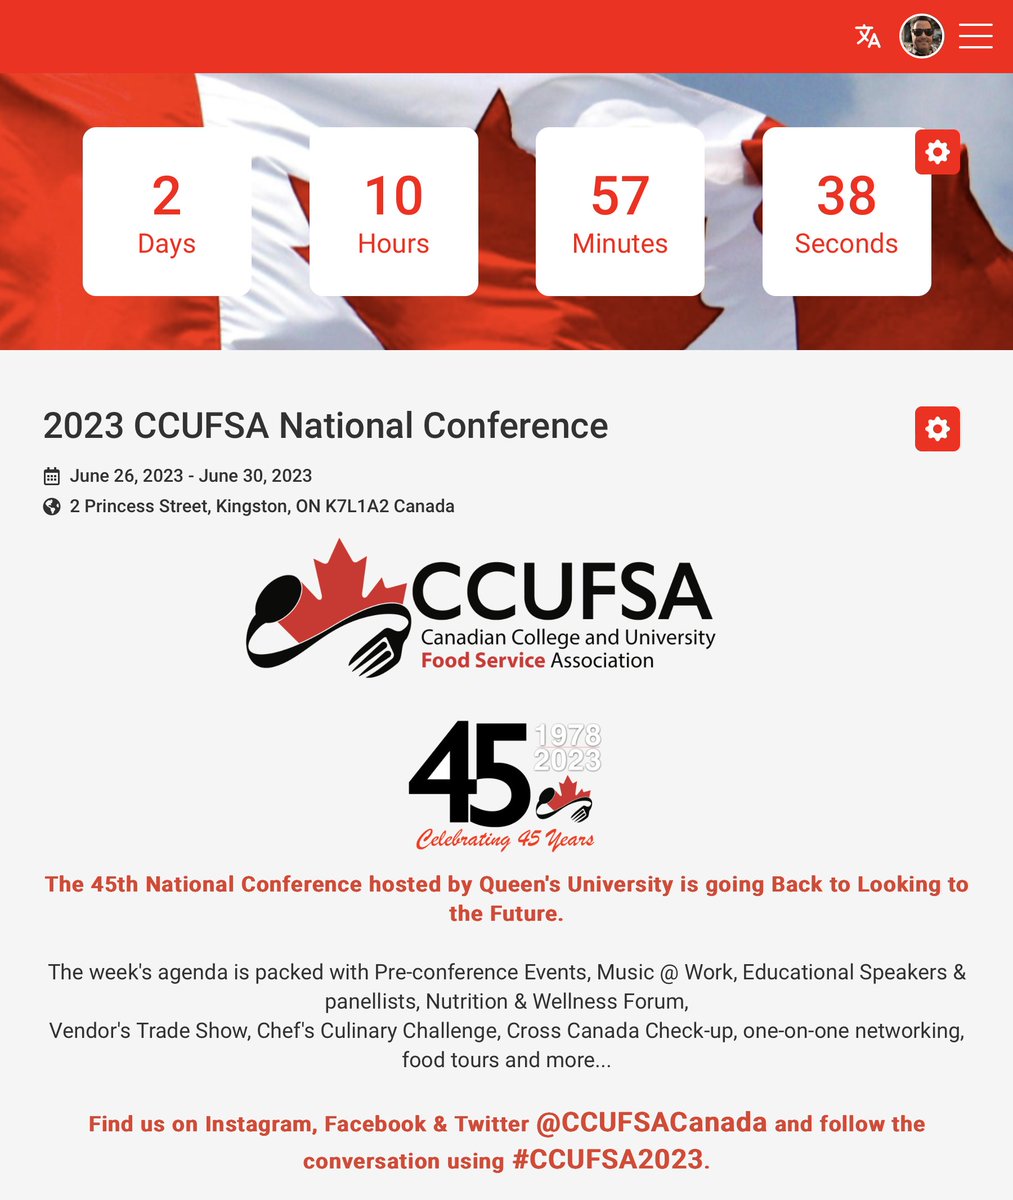 If you're looking for me in the next 7 days, I'll be right here #CCUFSA2023 @CCUFSACanada